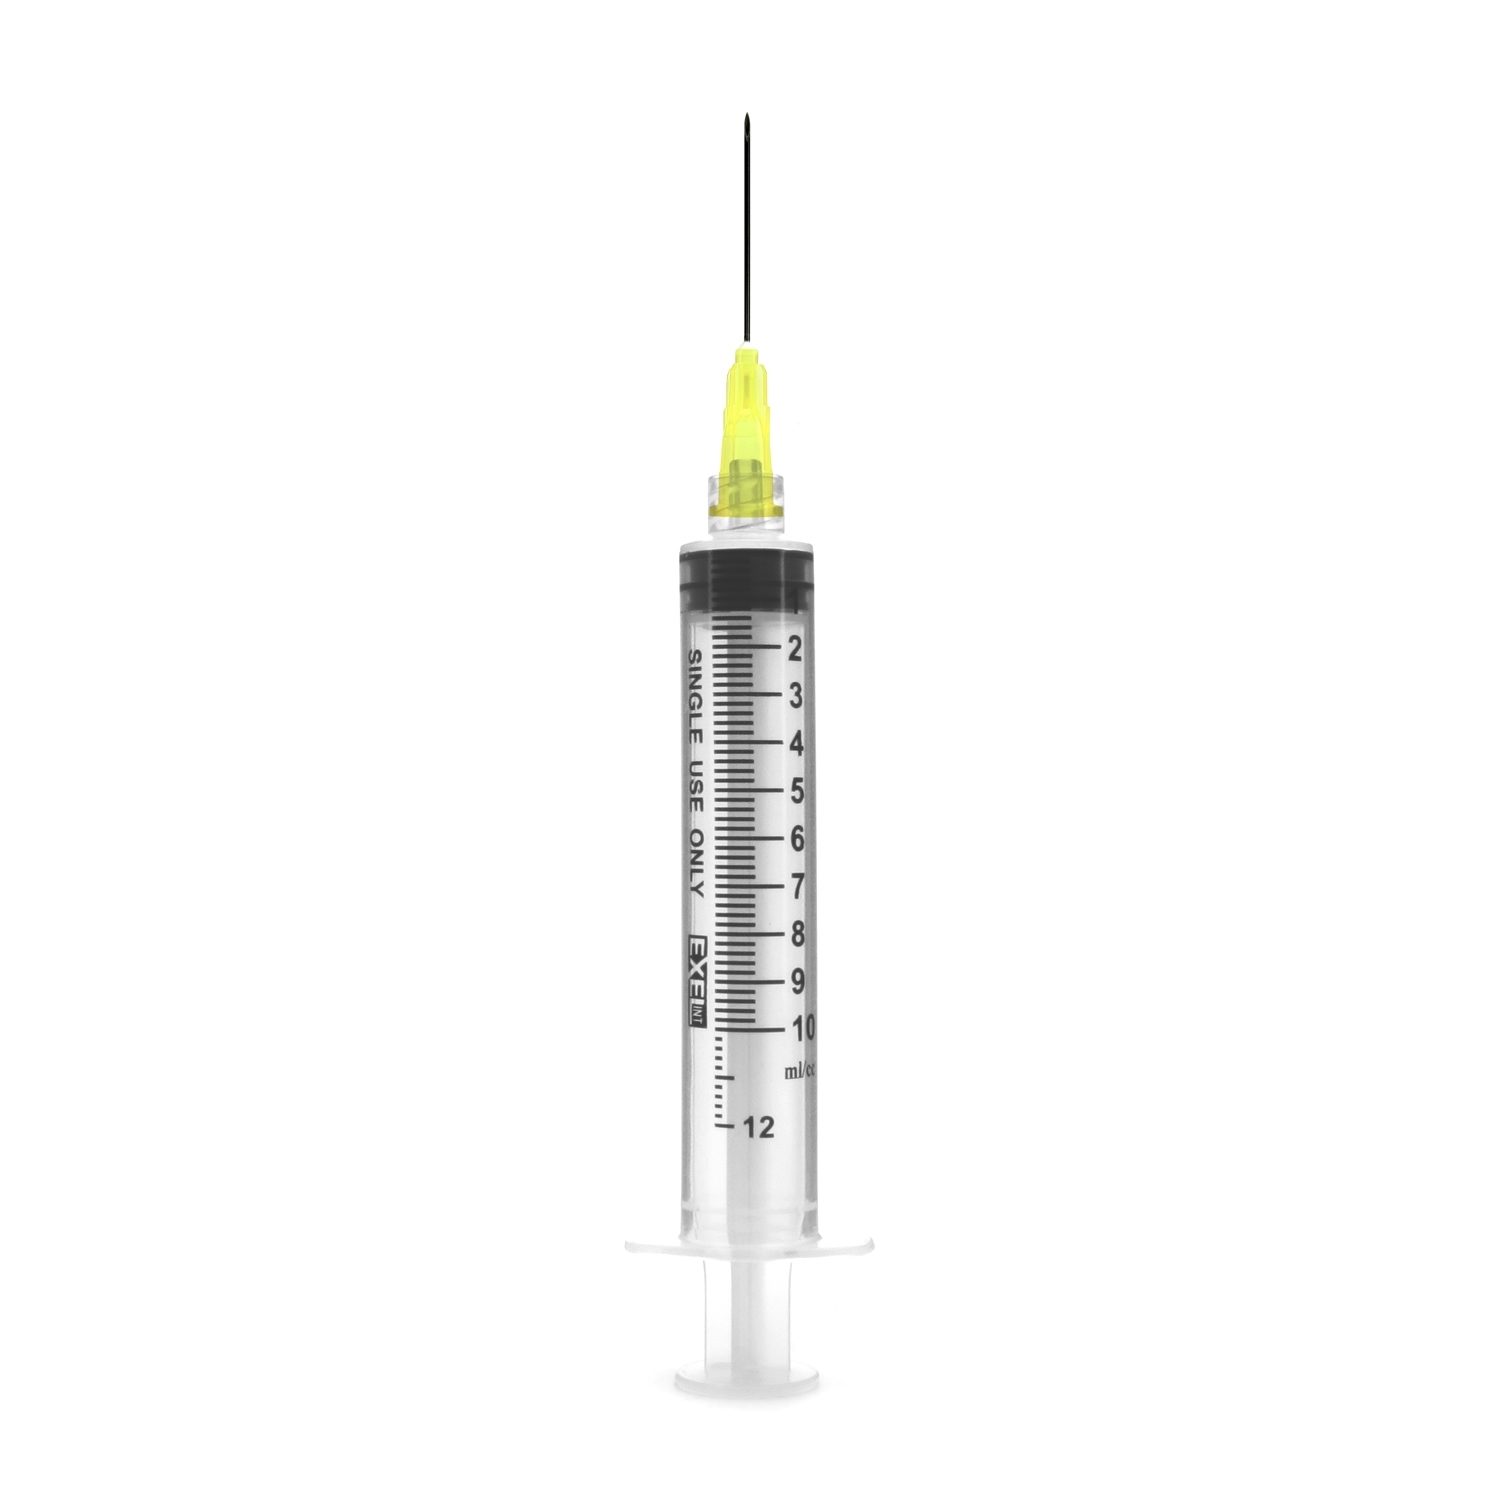 Syringe with hypodermic needle - Monoject™ 12 mL 20 gauge with 1 Inch detachable non-safety needle